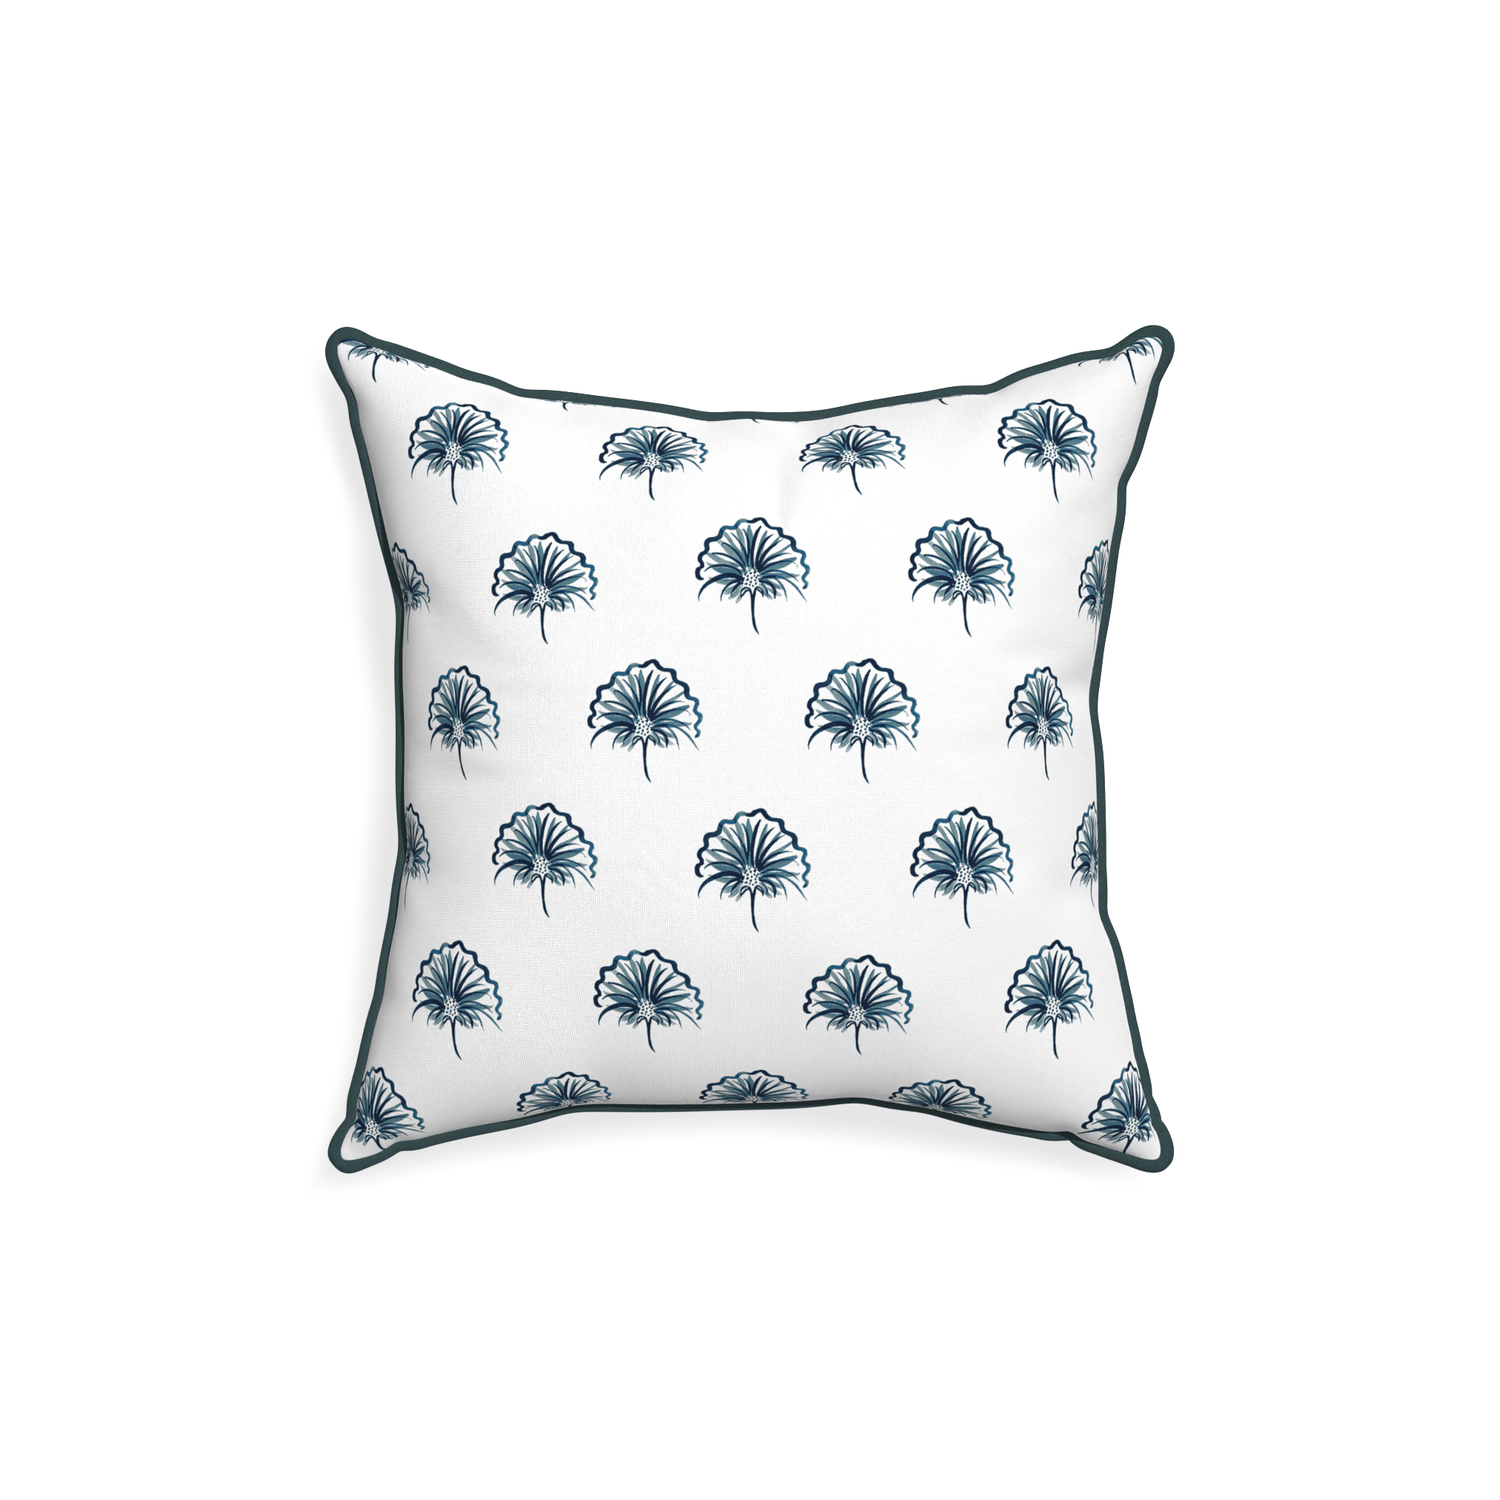 18-square penelope midnight custom floral navypillow with p piping on white background